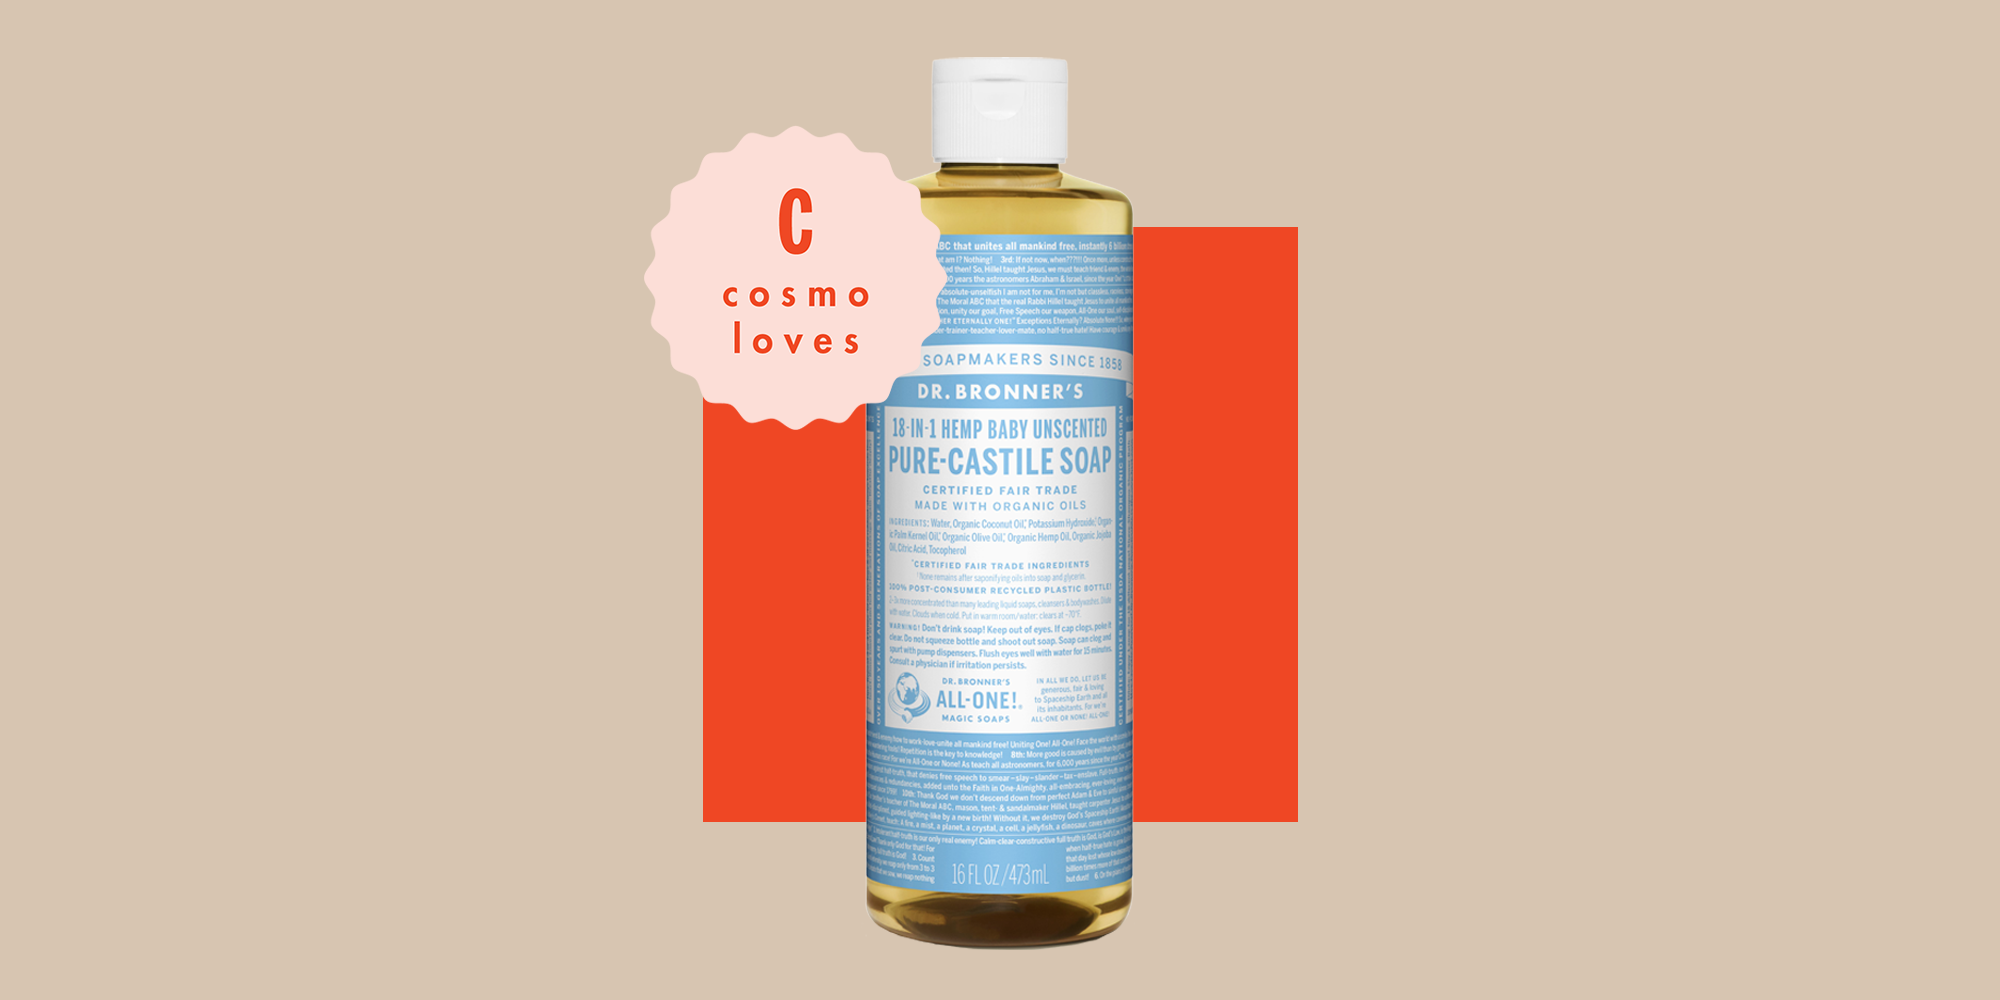 Castile Soap For Baby Bath / Moisturising Natural Baby Wash Organic Sulphate Free Soothing Castile Soap Body Wash For Dry Itchy Sensitive Skin With Coconut Oil Jojoba Oil Olive Oil Rosemary Extract And More 280ml Buy Online / Use it as baby soap.